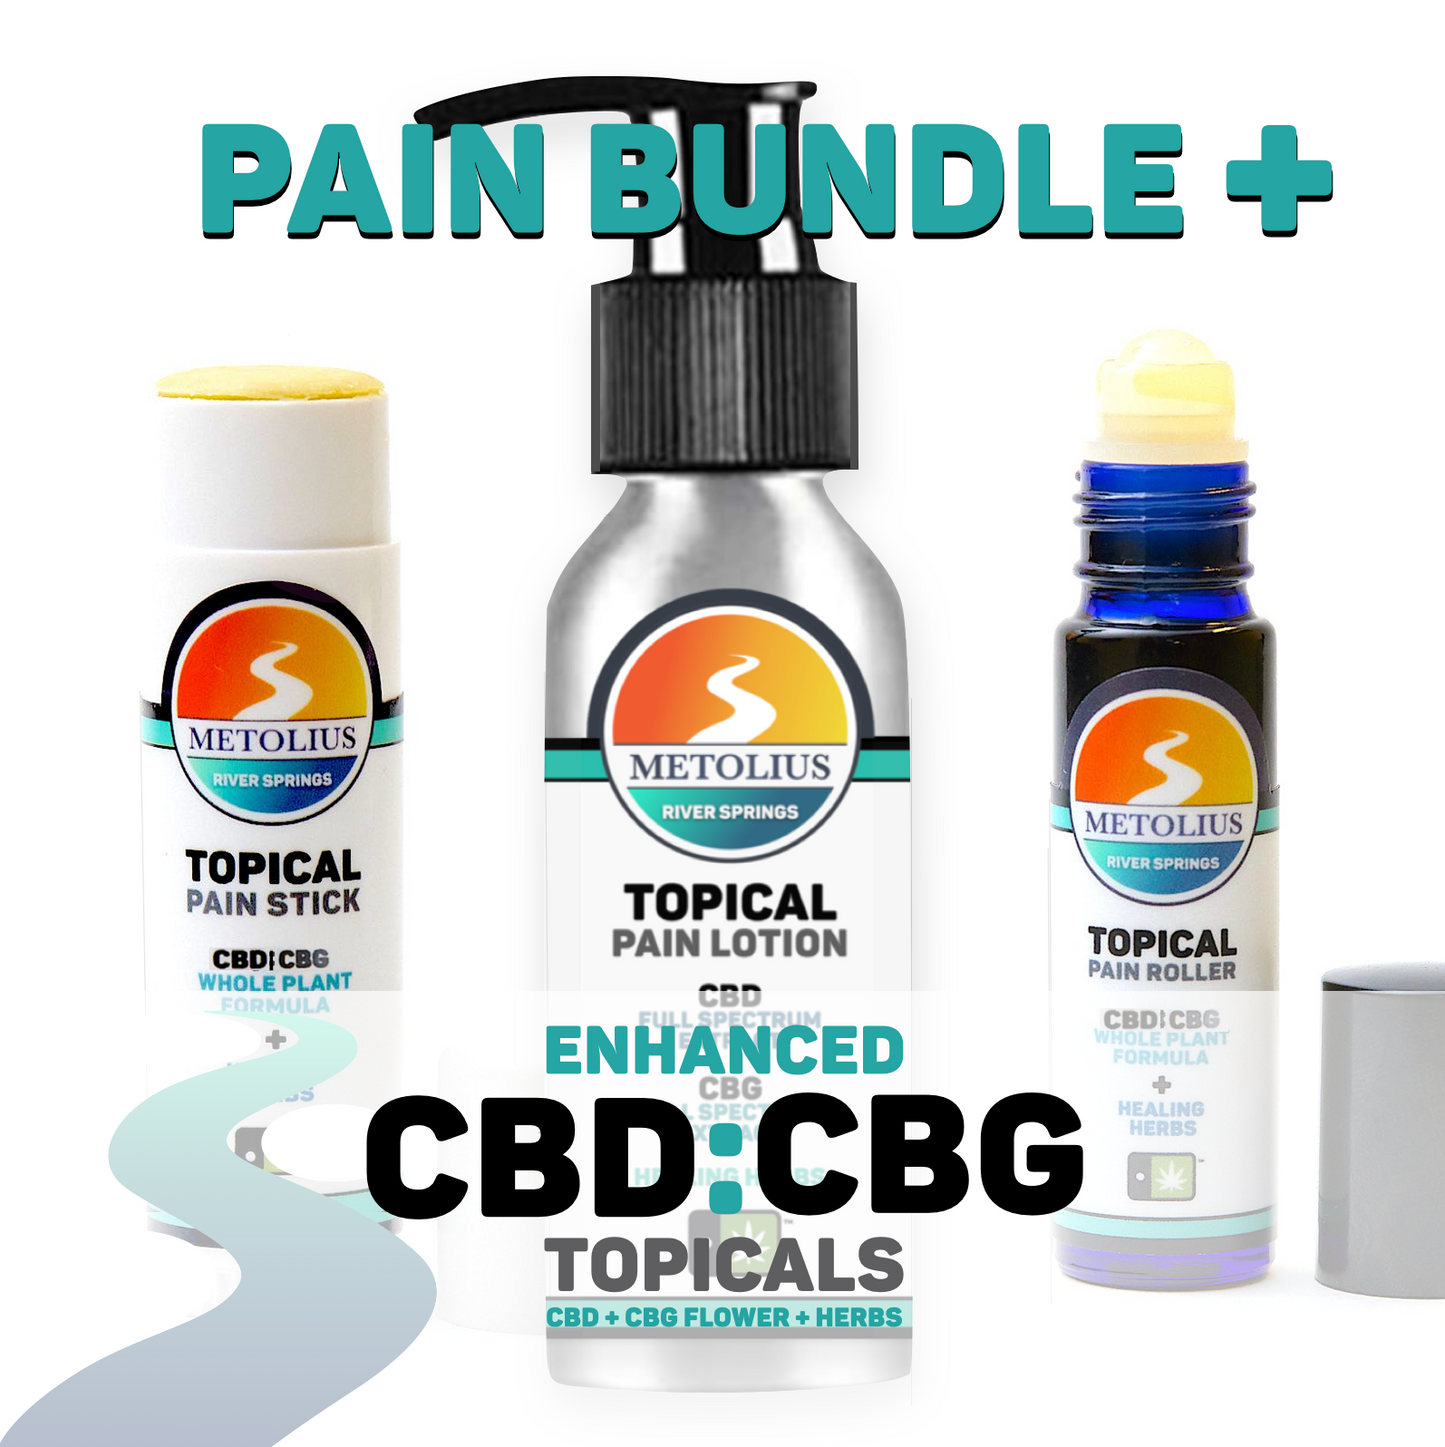 Can CBD + CBG Topicals Enhance Your Quality of Life - Reducing Pain And Improving Mobility